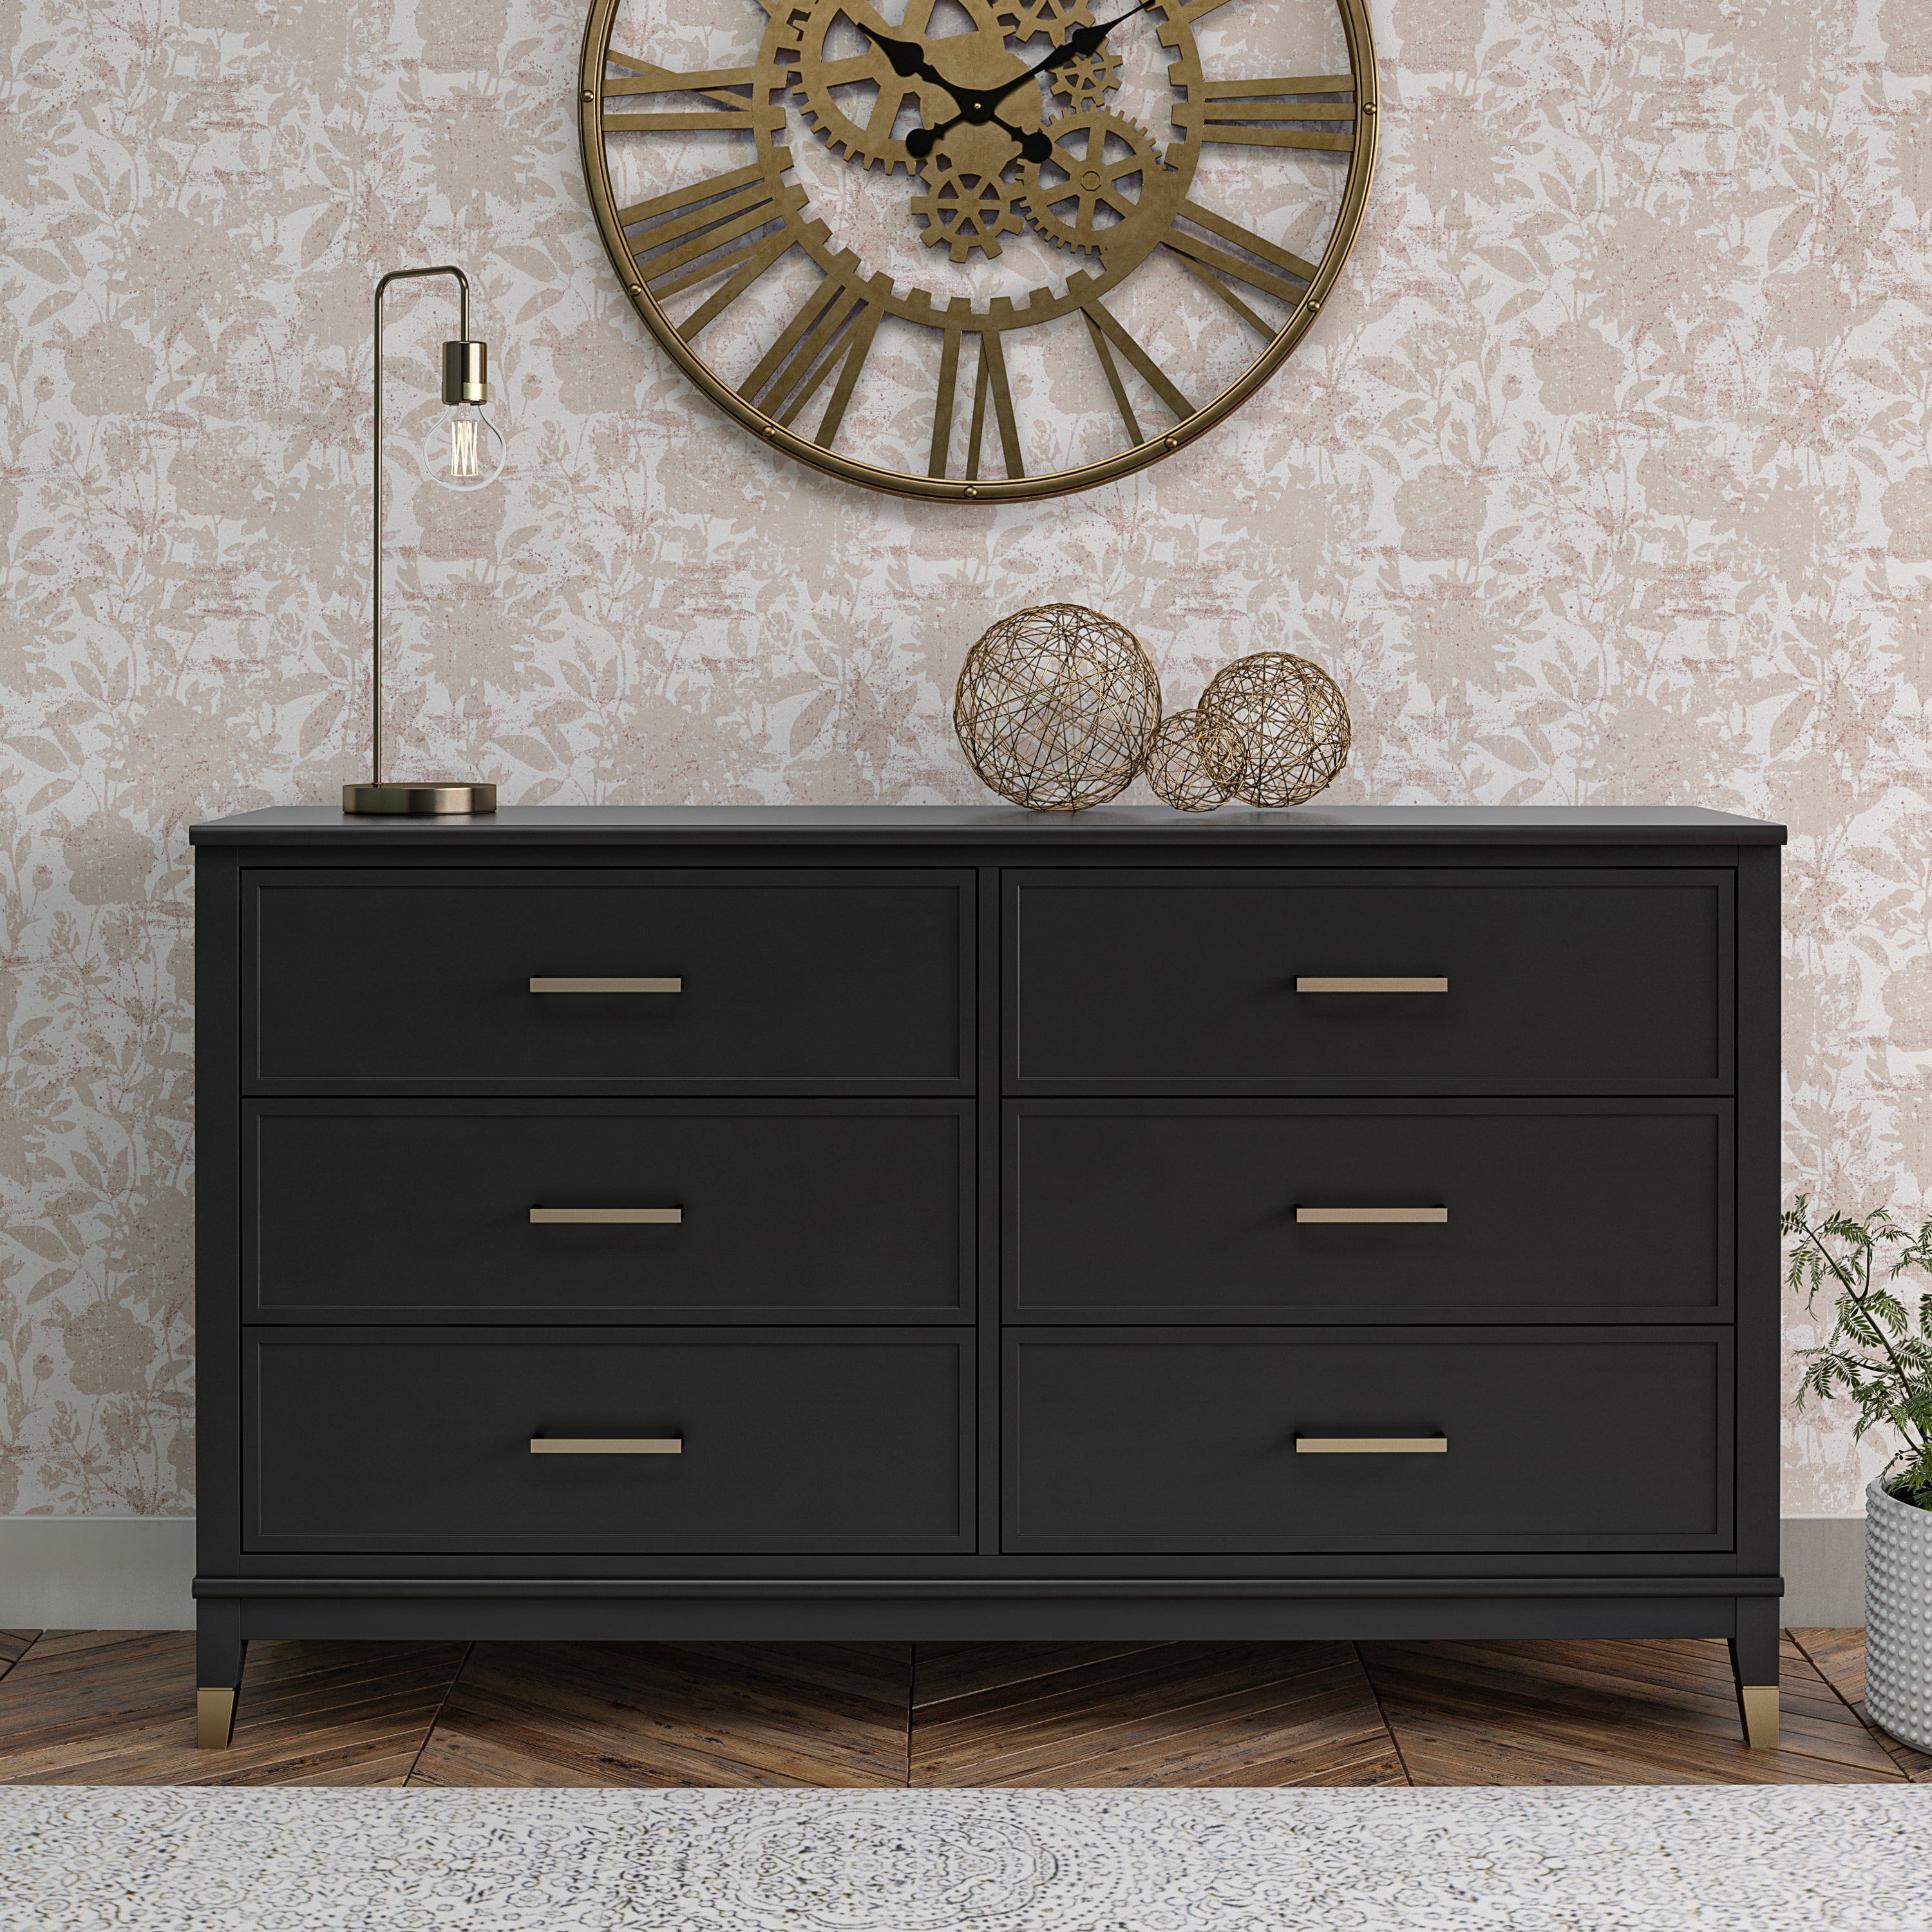 Cosmo Living Westerleigh 6 Drawer Chest